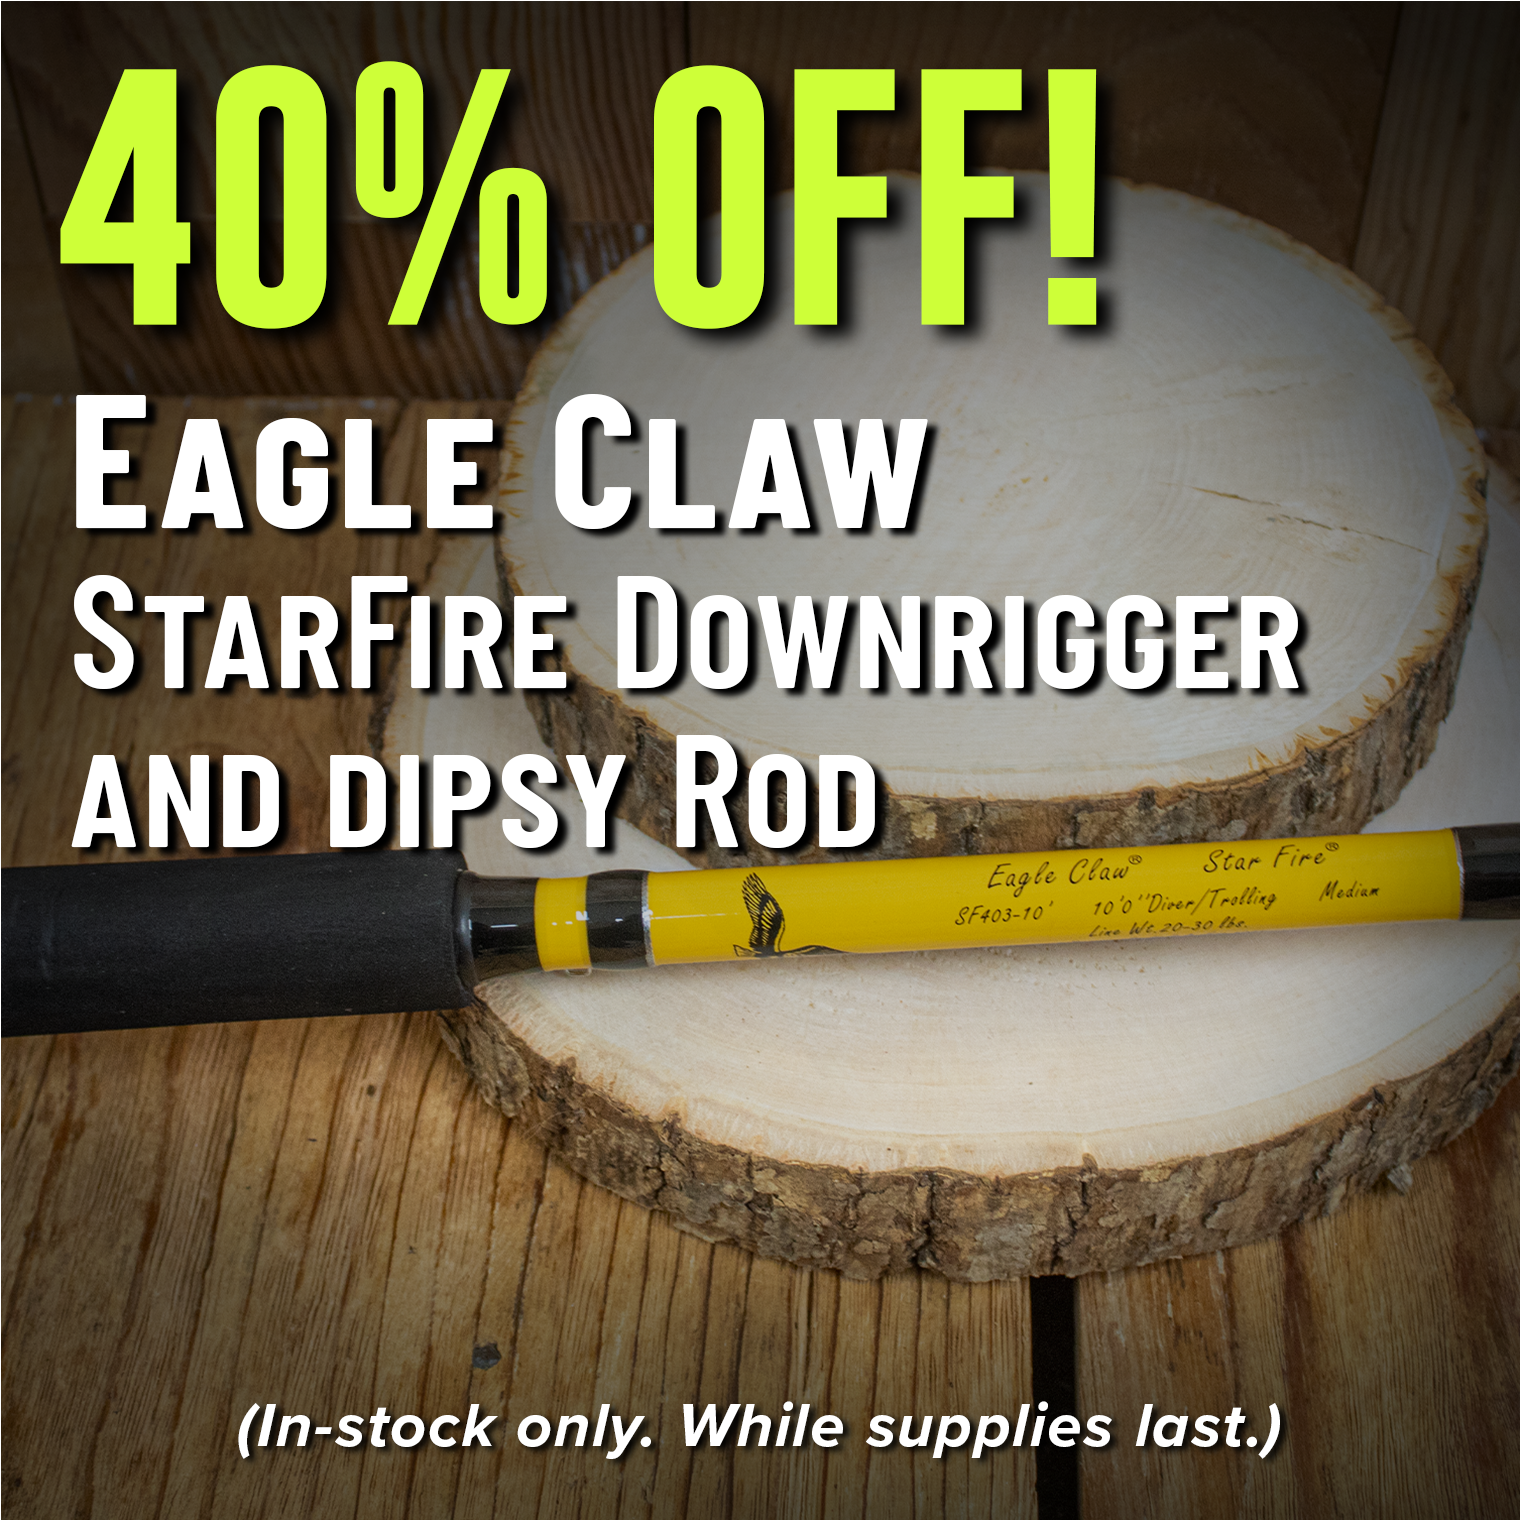 40% Off! Eagle Claw StarFire Downrigger and Dipsy Rod (In-stock only. While supplies last.)